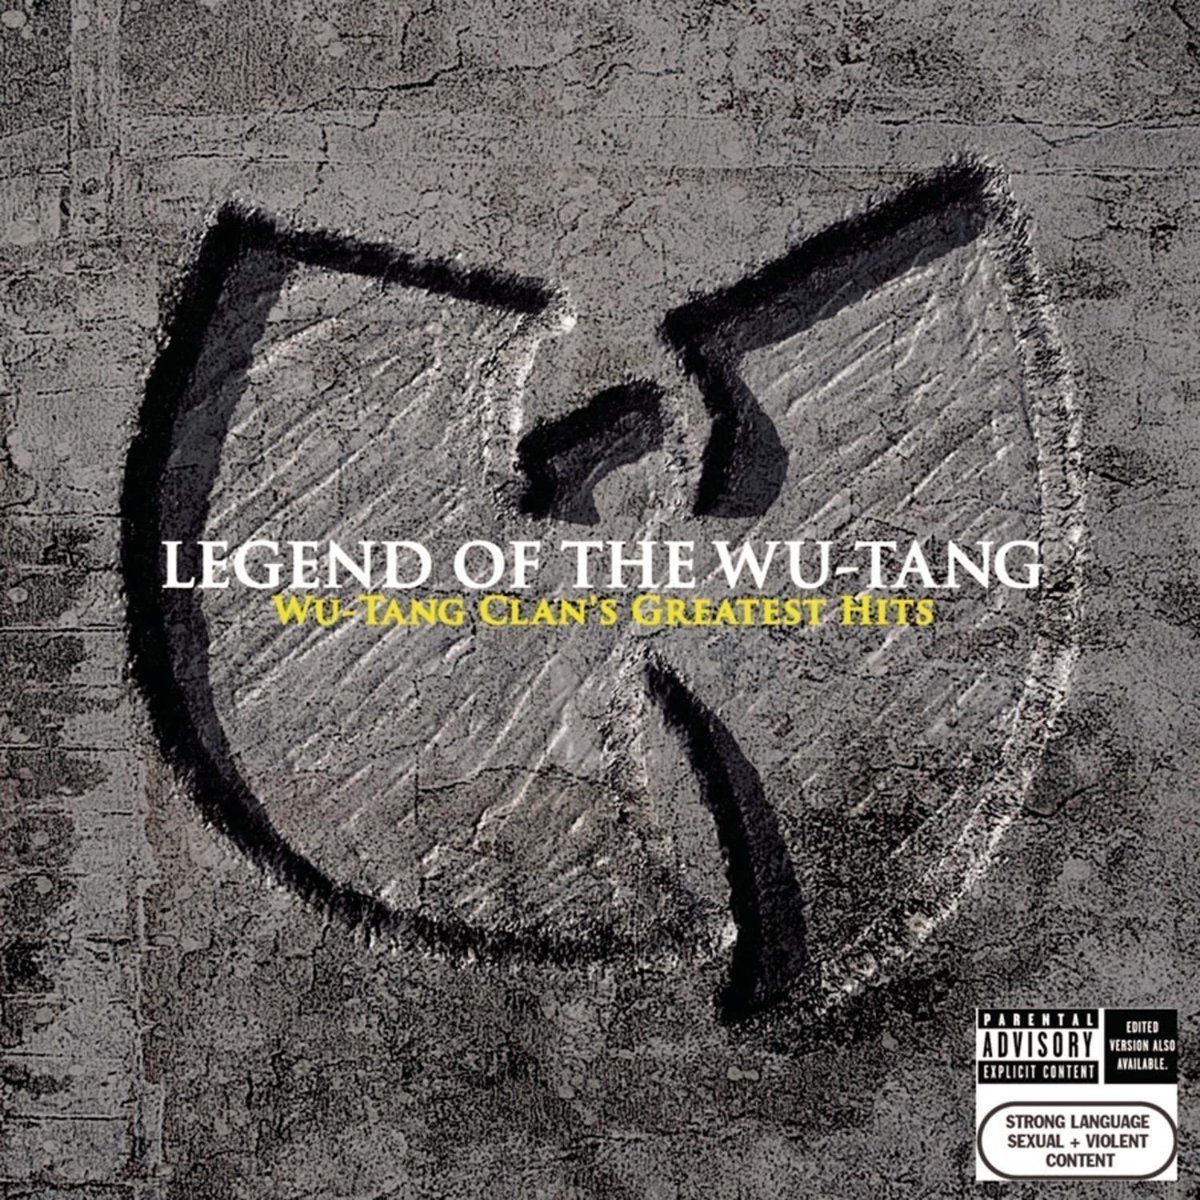 Disque vinyle Wu-Tang Clan Legend of the Wu-Tang: Wu-Tang Clan's Greatest Hits (2 LP)